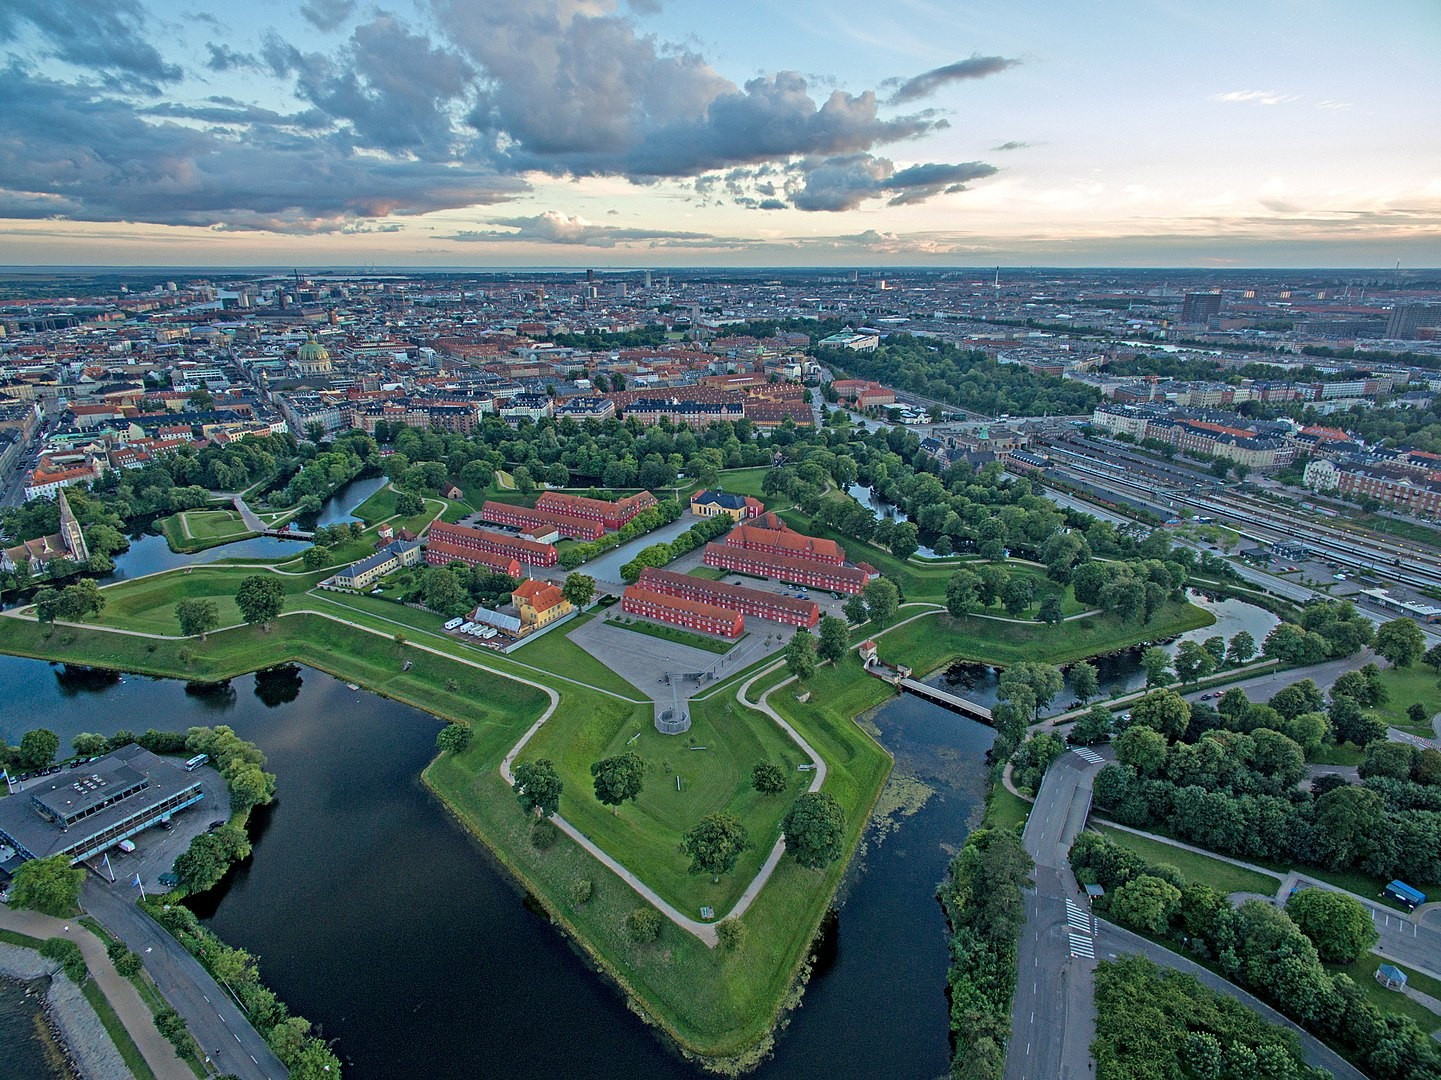 By CucombreLibre from New York, NY, USA - Copenhagen-Drone-20160704-011, CC BY 2.0, https://commons.wikimedia.org/w/index.php?curid=53833907